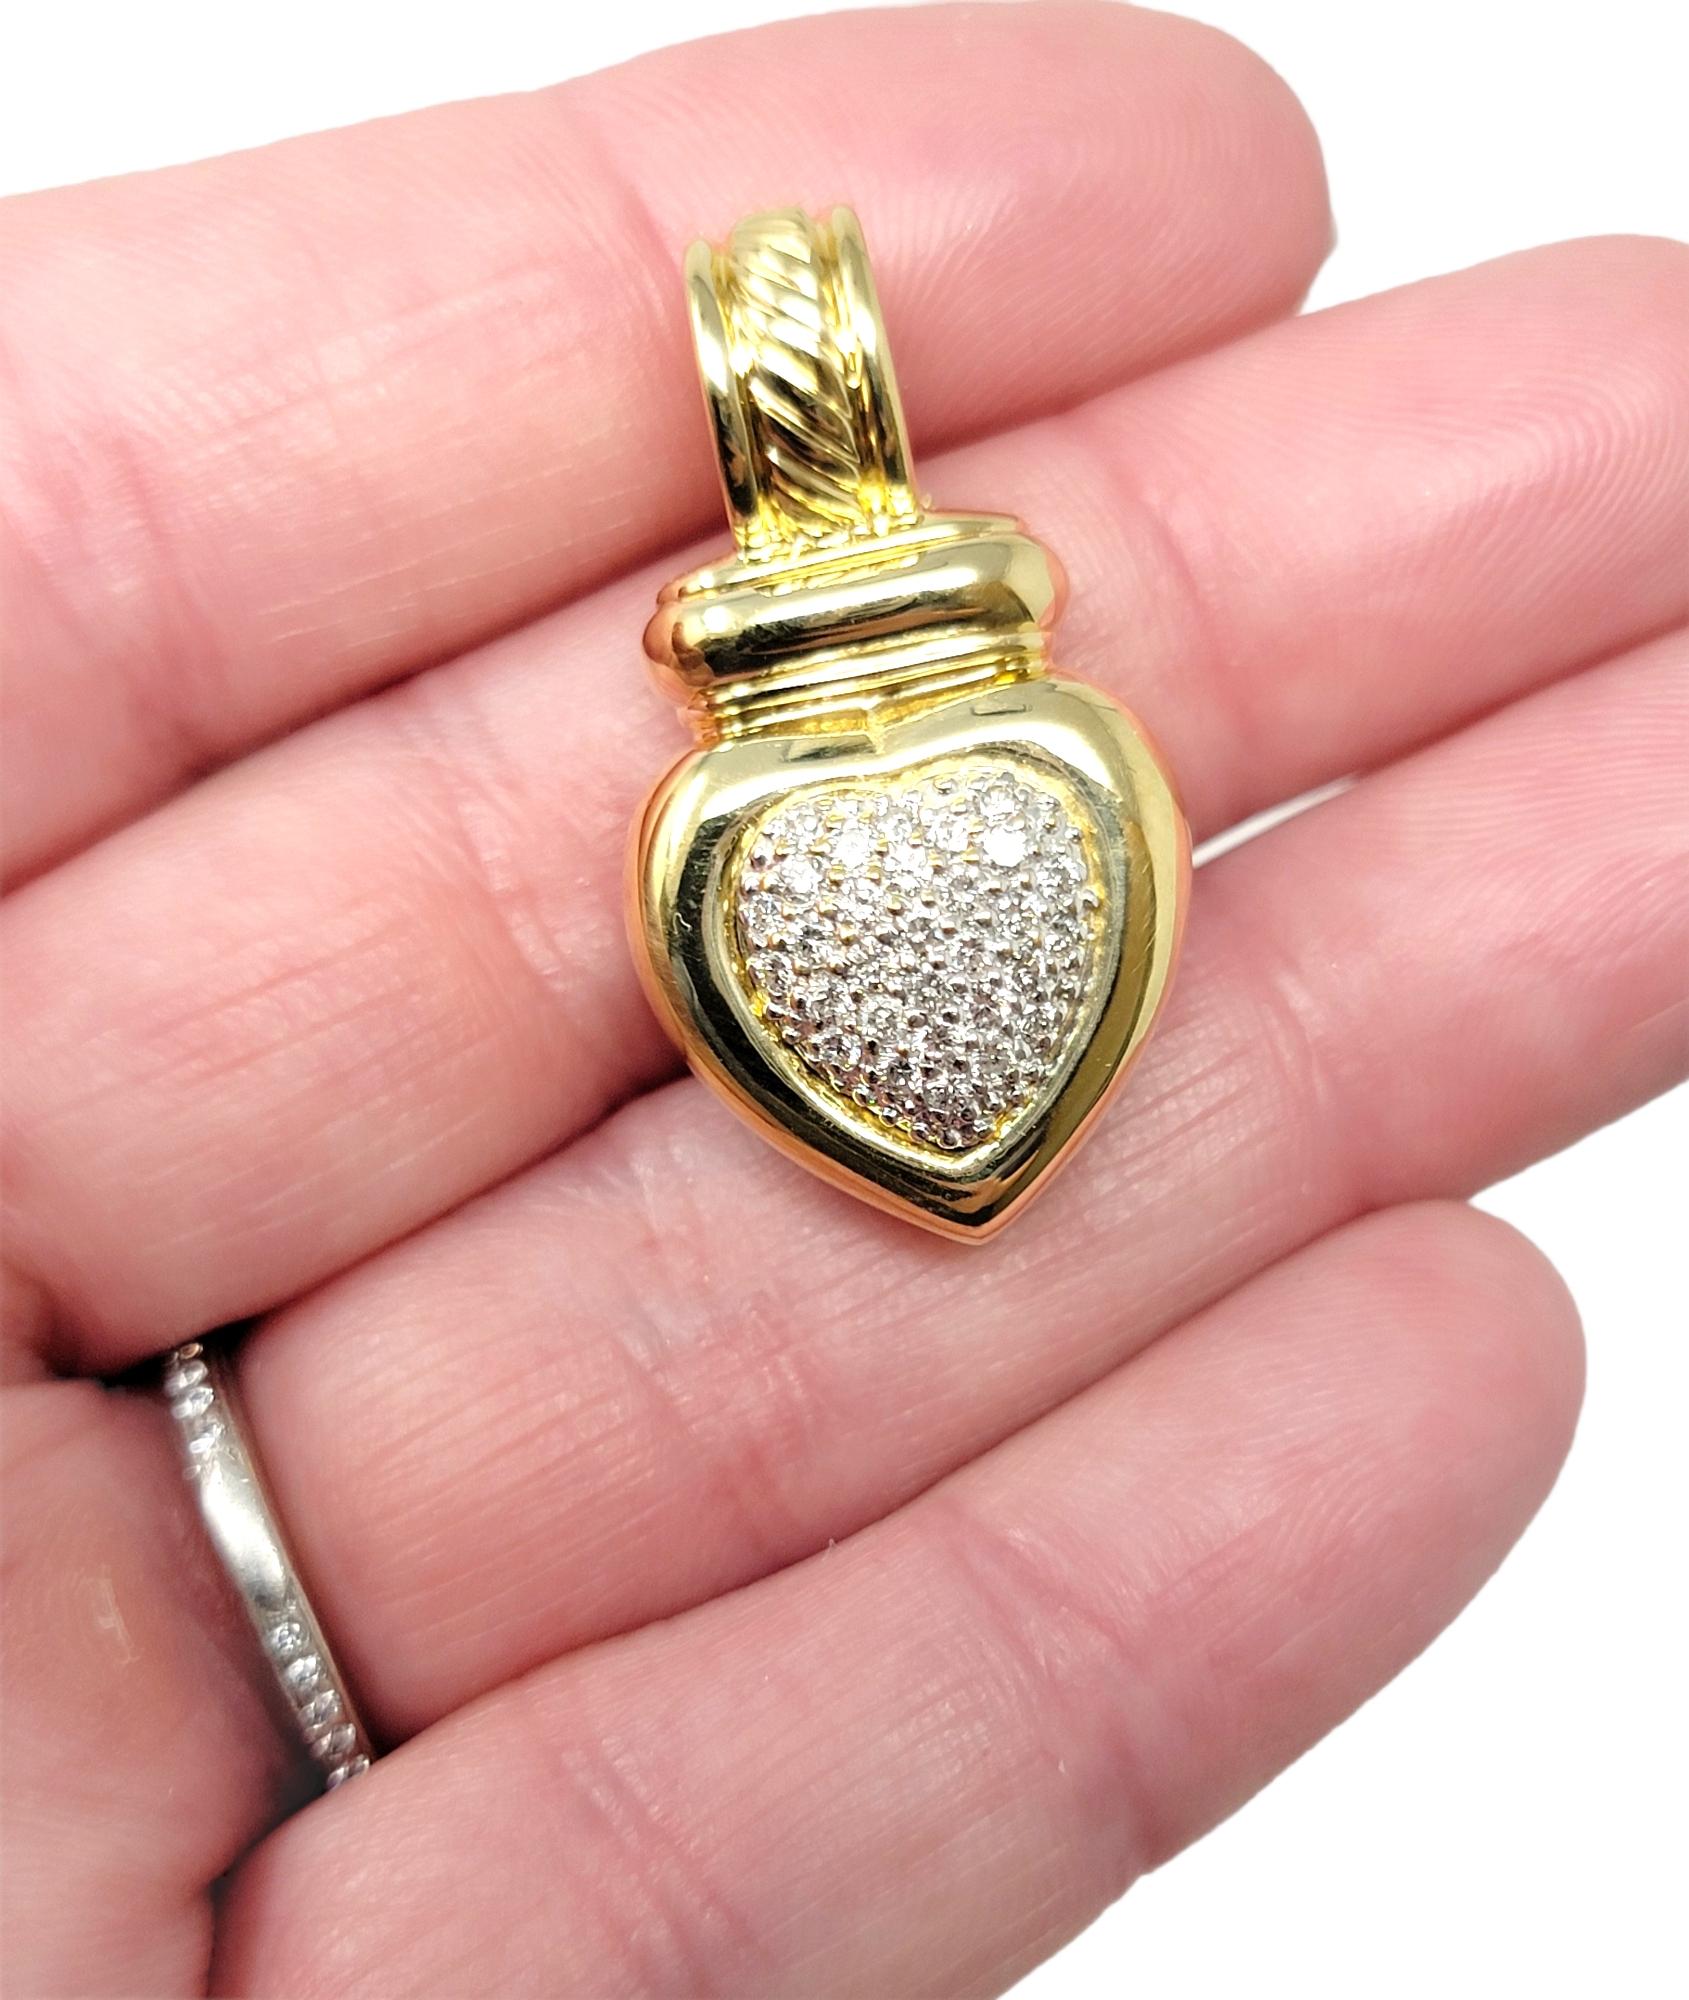 Lovely designer pendant by David Yurman features a polished 18 karat yellow gold heart embellished with glittering pave diamonds. This listing is for the pendant only, no necklace is included. 

Item type: Pendant
Metal: 18K Yellow Gold
Weight: 12.6